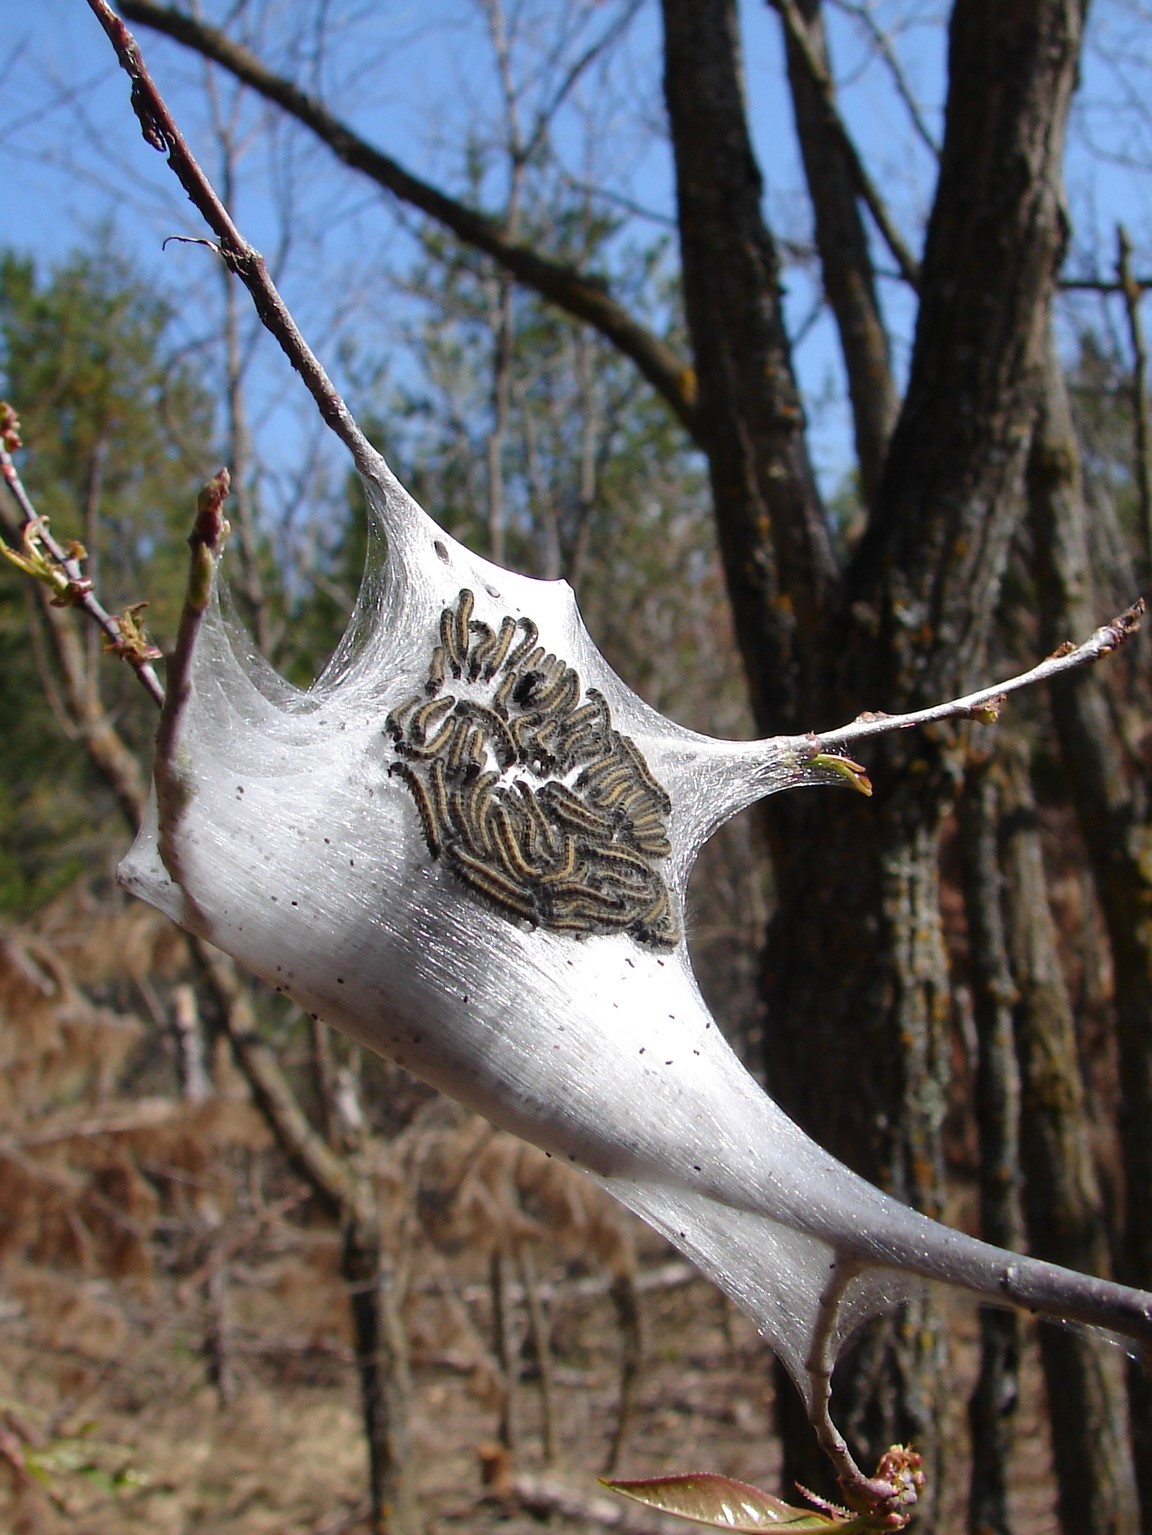 A white web nest between tree branches has many eastern tent caterpillars resting on it.